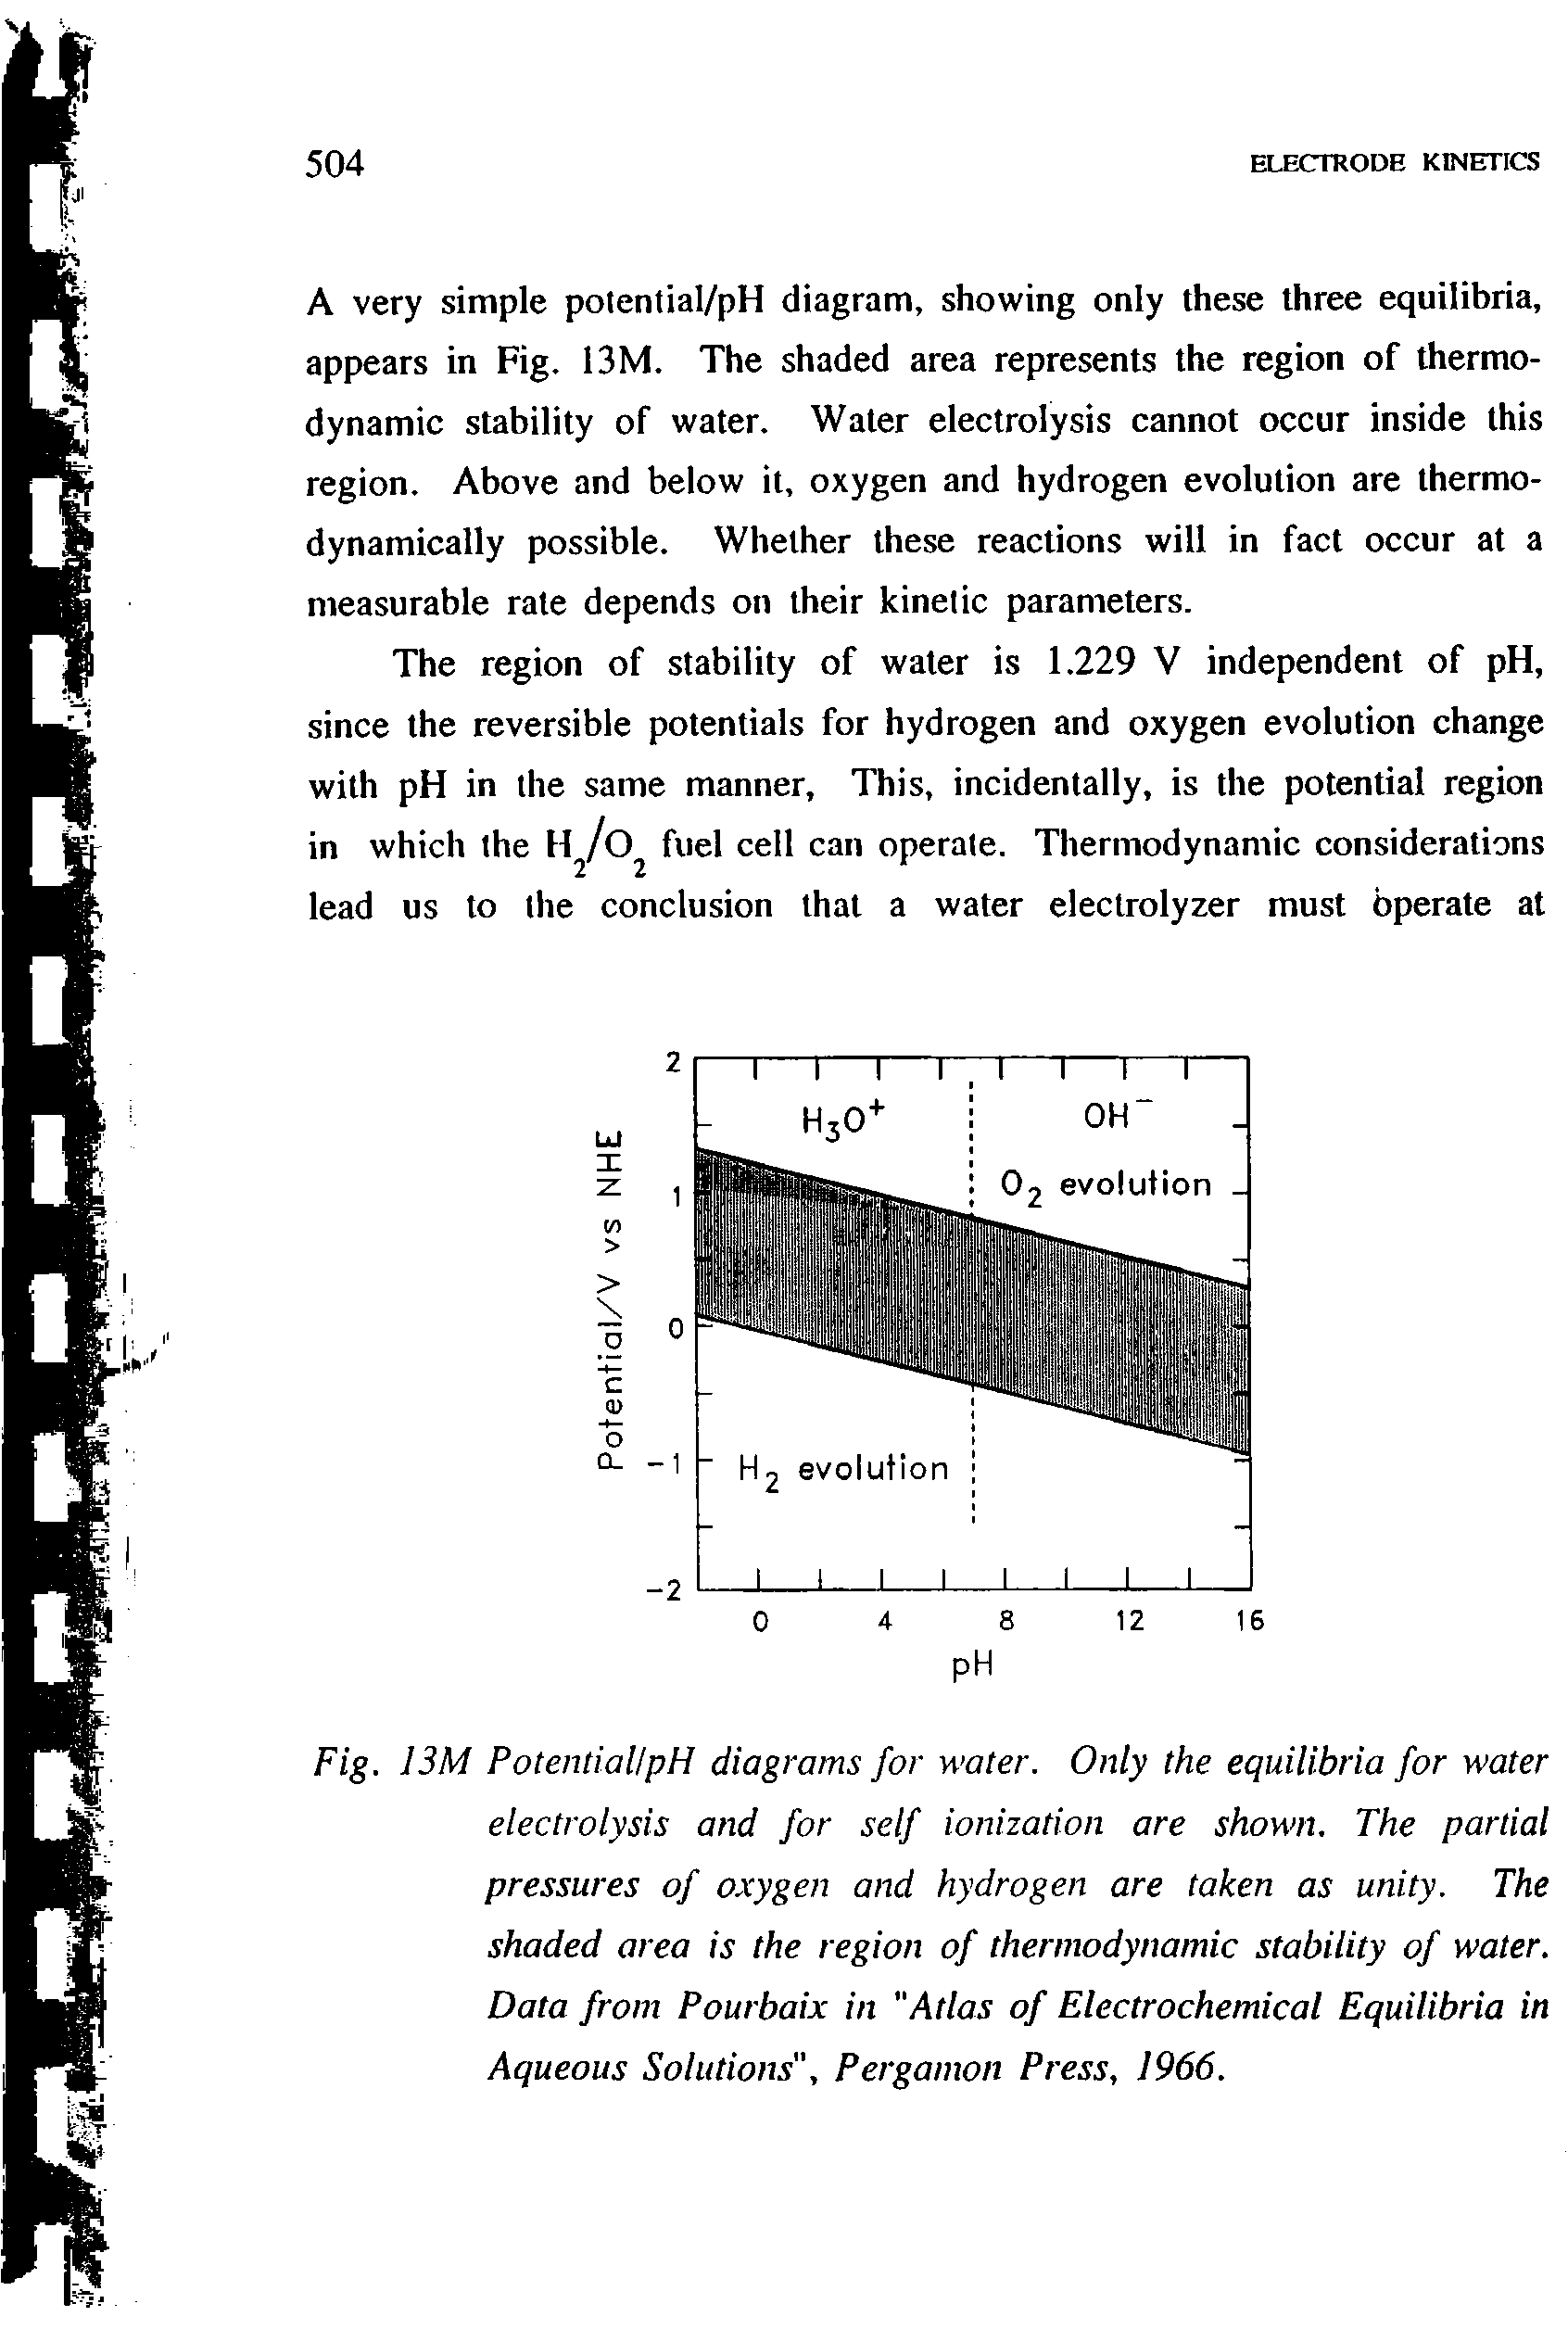 Fig. 13M PotentiallpH diagrams for water. Only the equilibria for water electrolysis and for self ionization are shown. The partial pressures of oxygen and hydrogen are taken as unity. The shaded area is the region of thermodynamic stability of water. Data from Pourbaix in "Atlas of Electrochemical Equilibria in Aqueous Solutions", Pergamon Press, 1966.